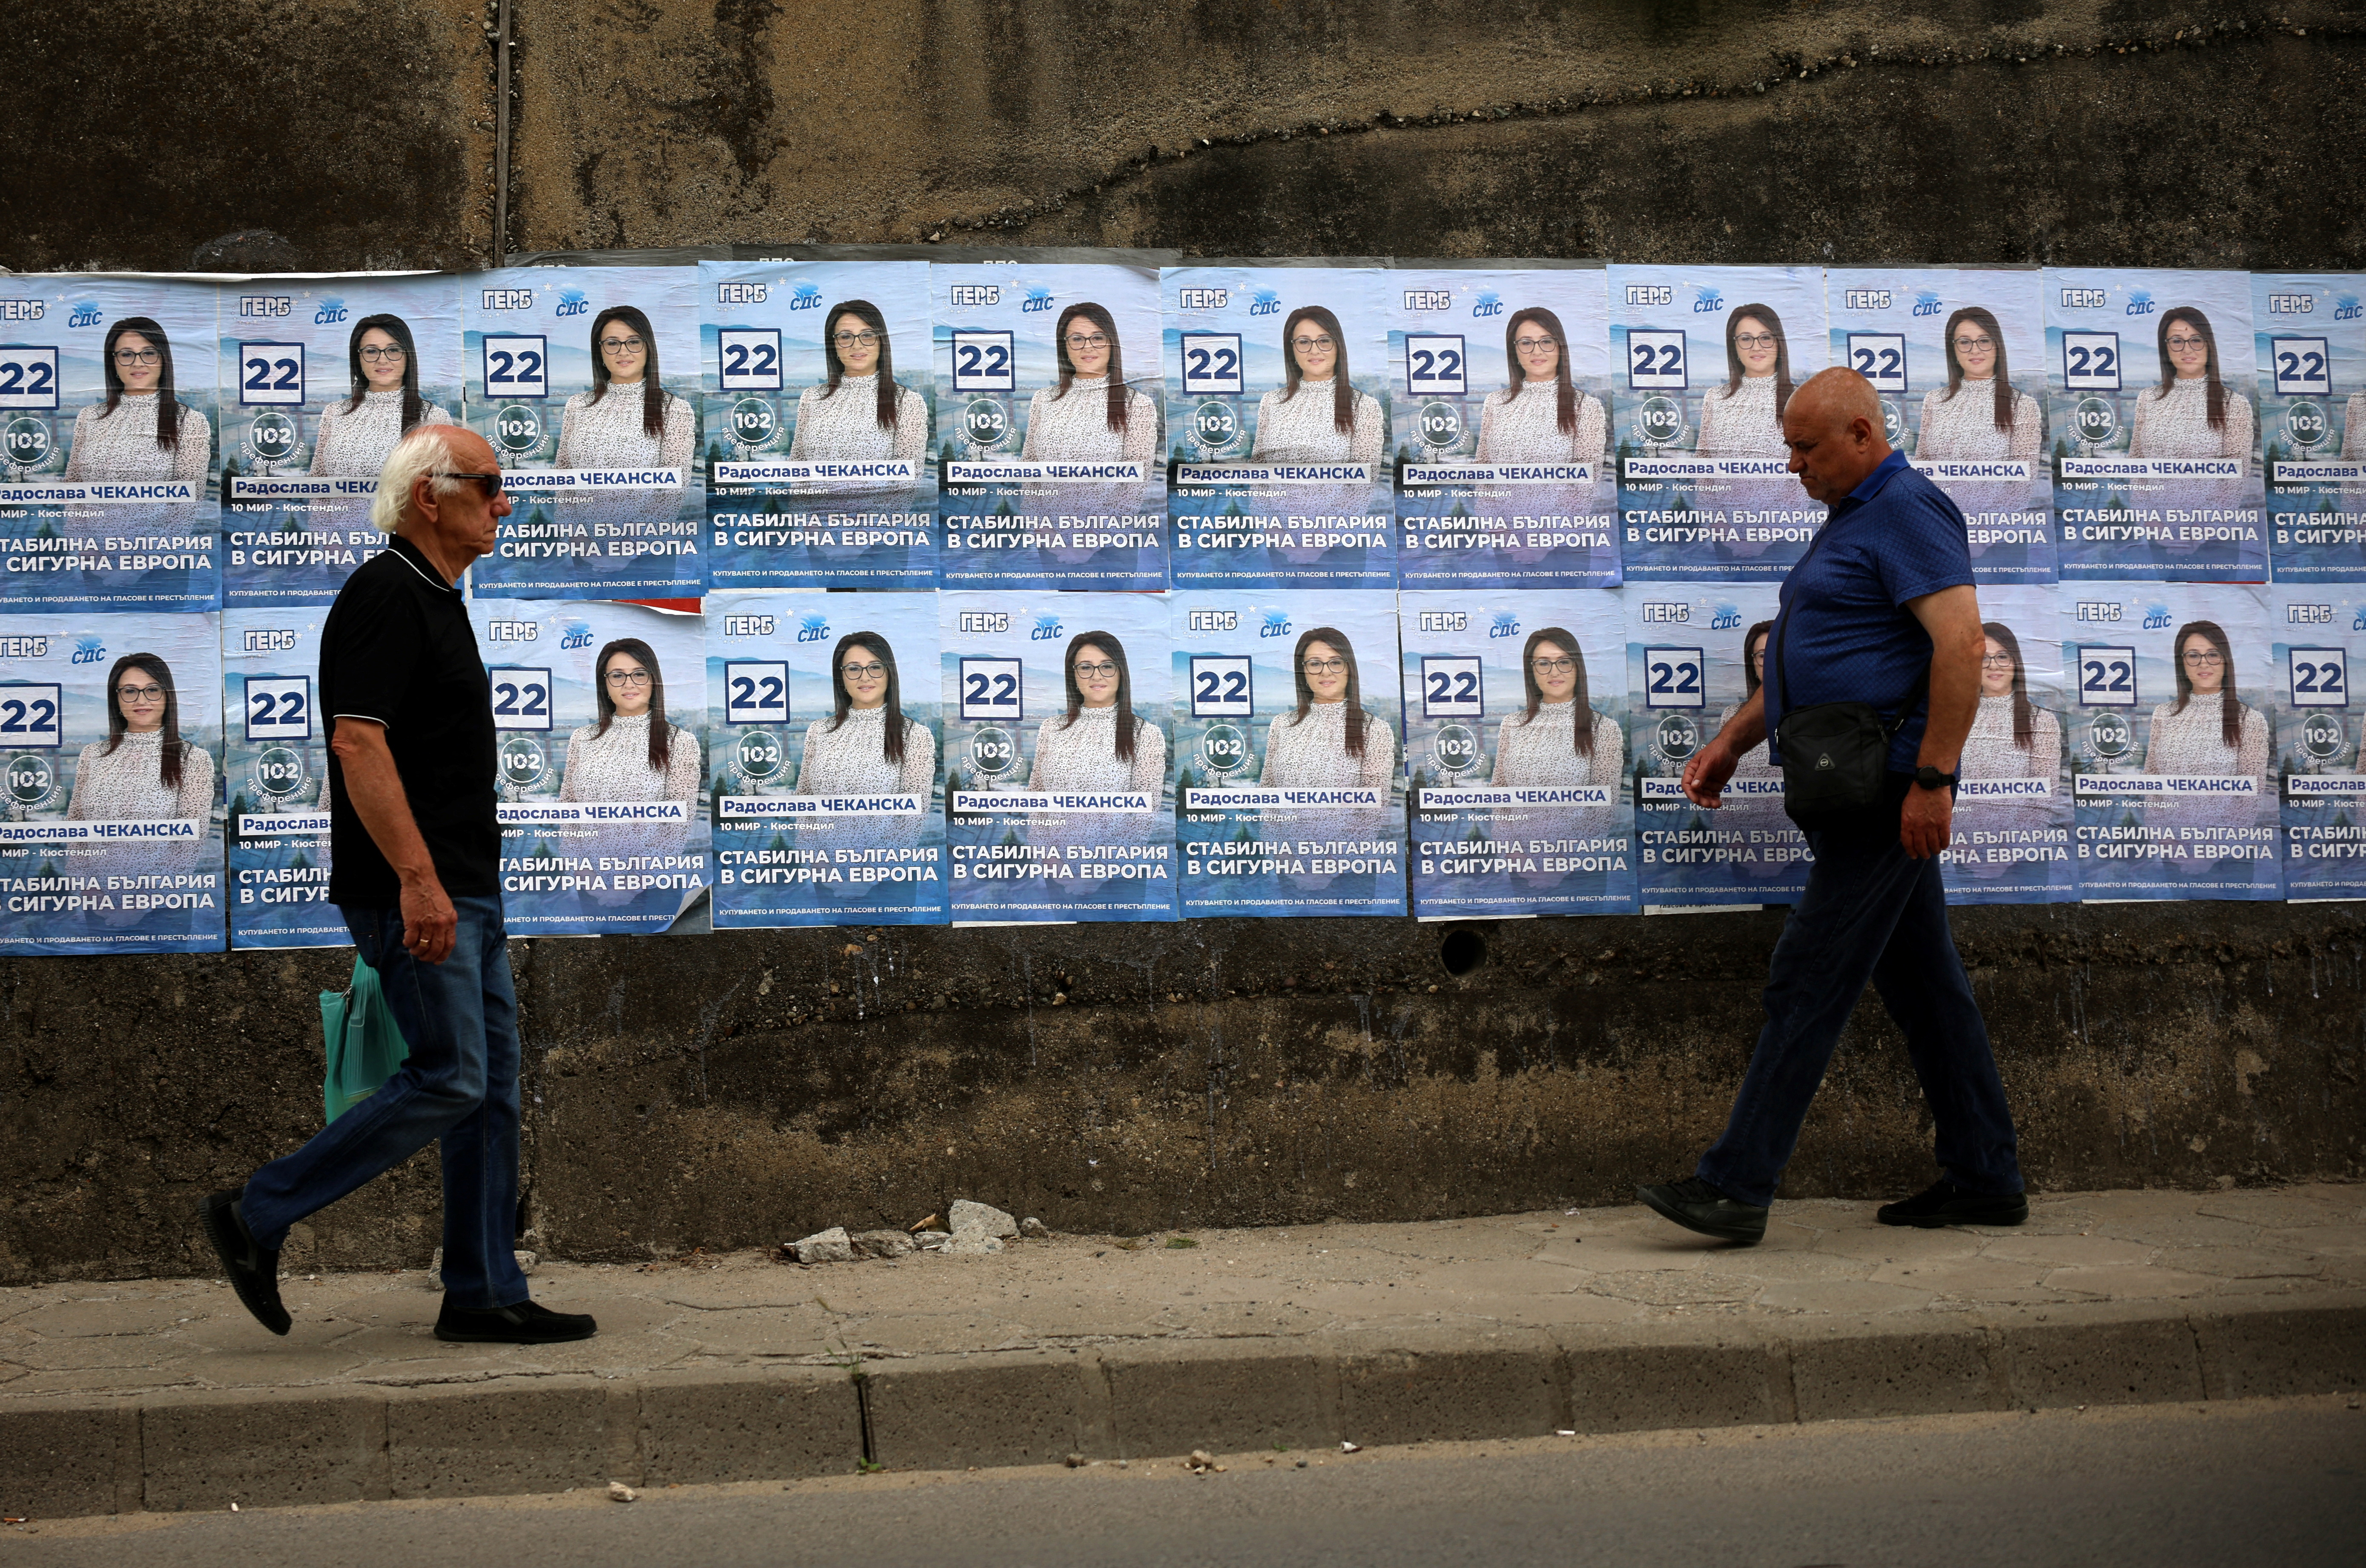 Bulgarians get ready for sixth election in three years